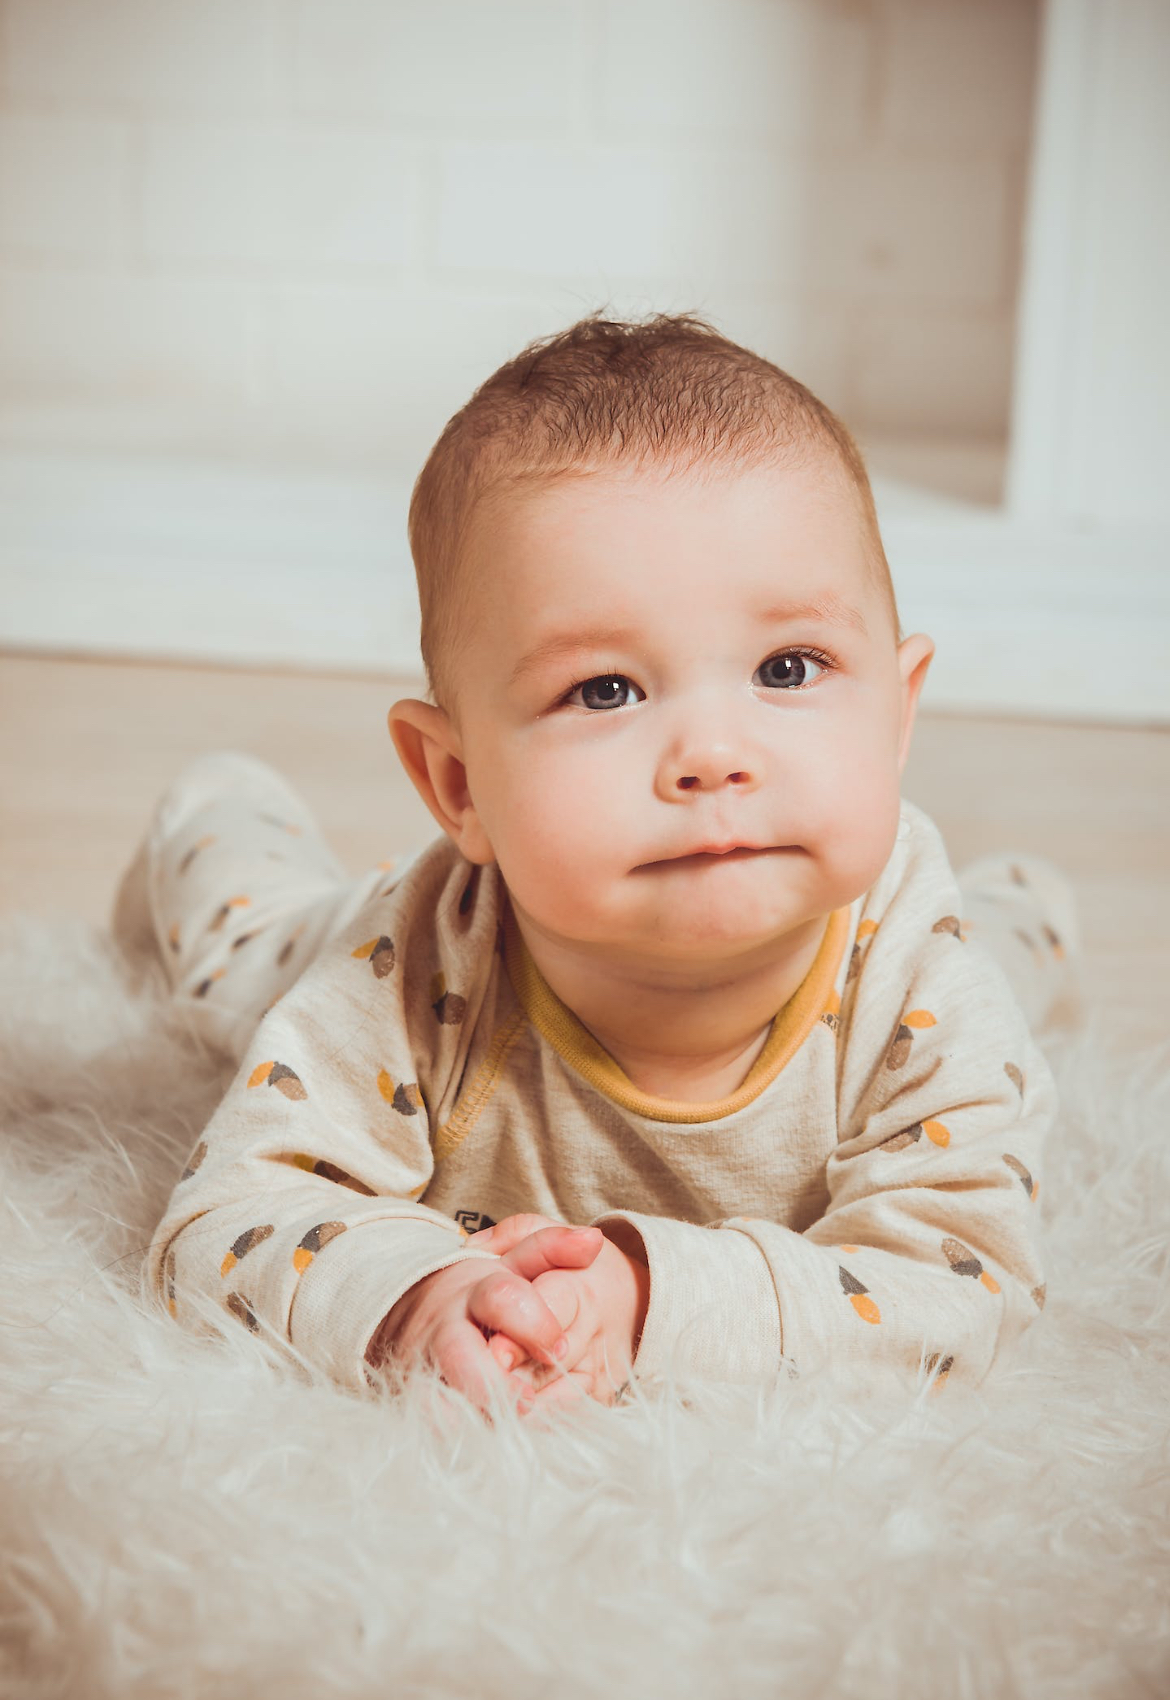 Infants: Importance of Tummy Time